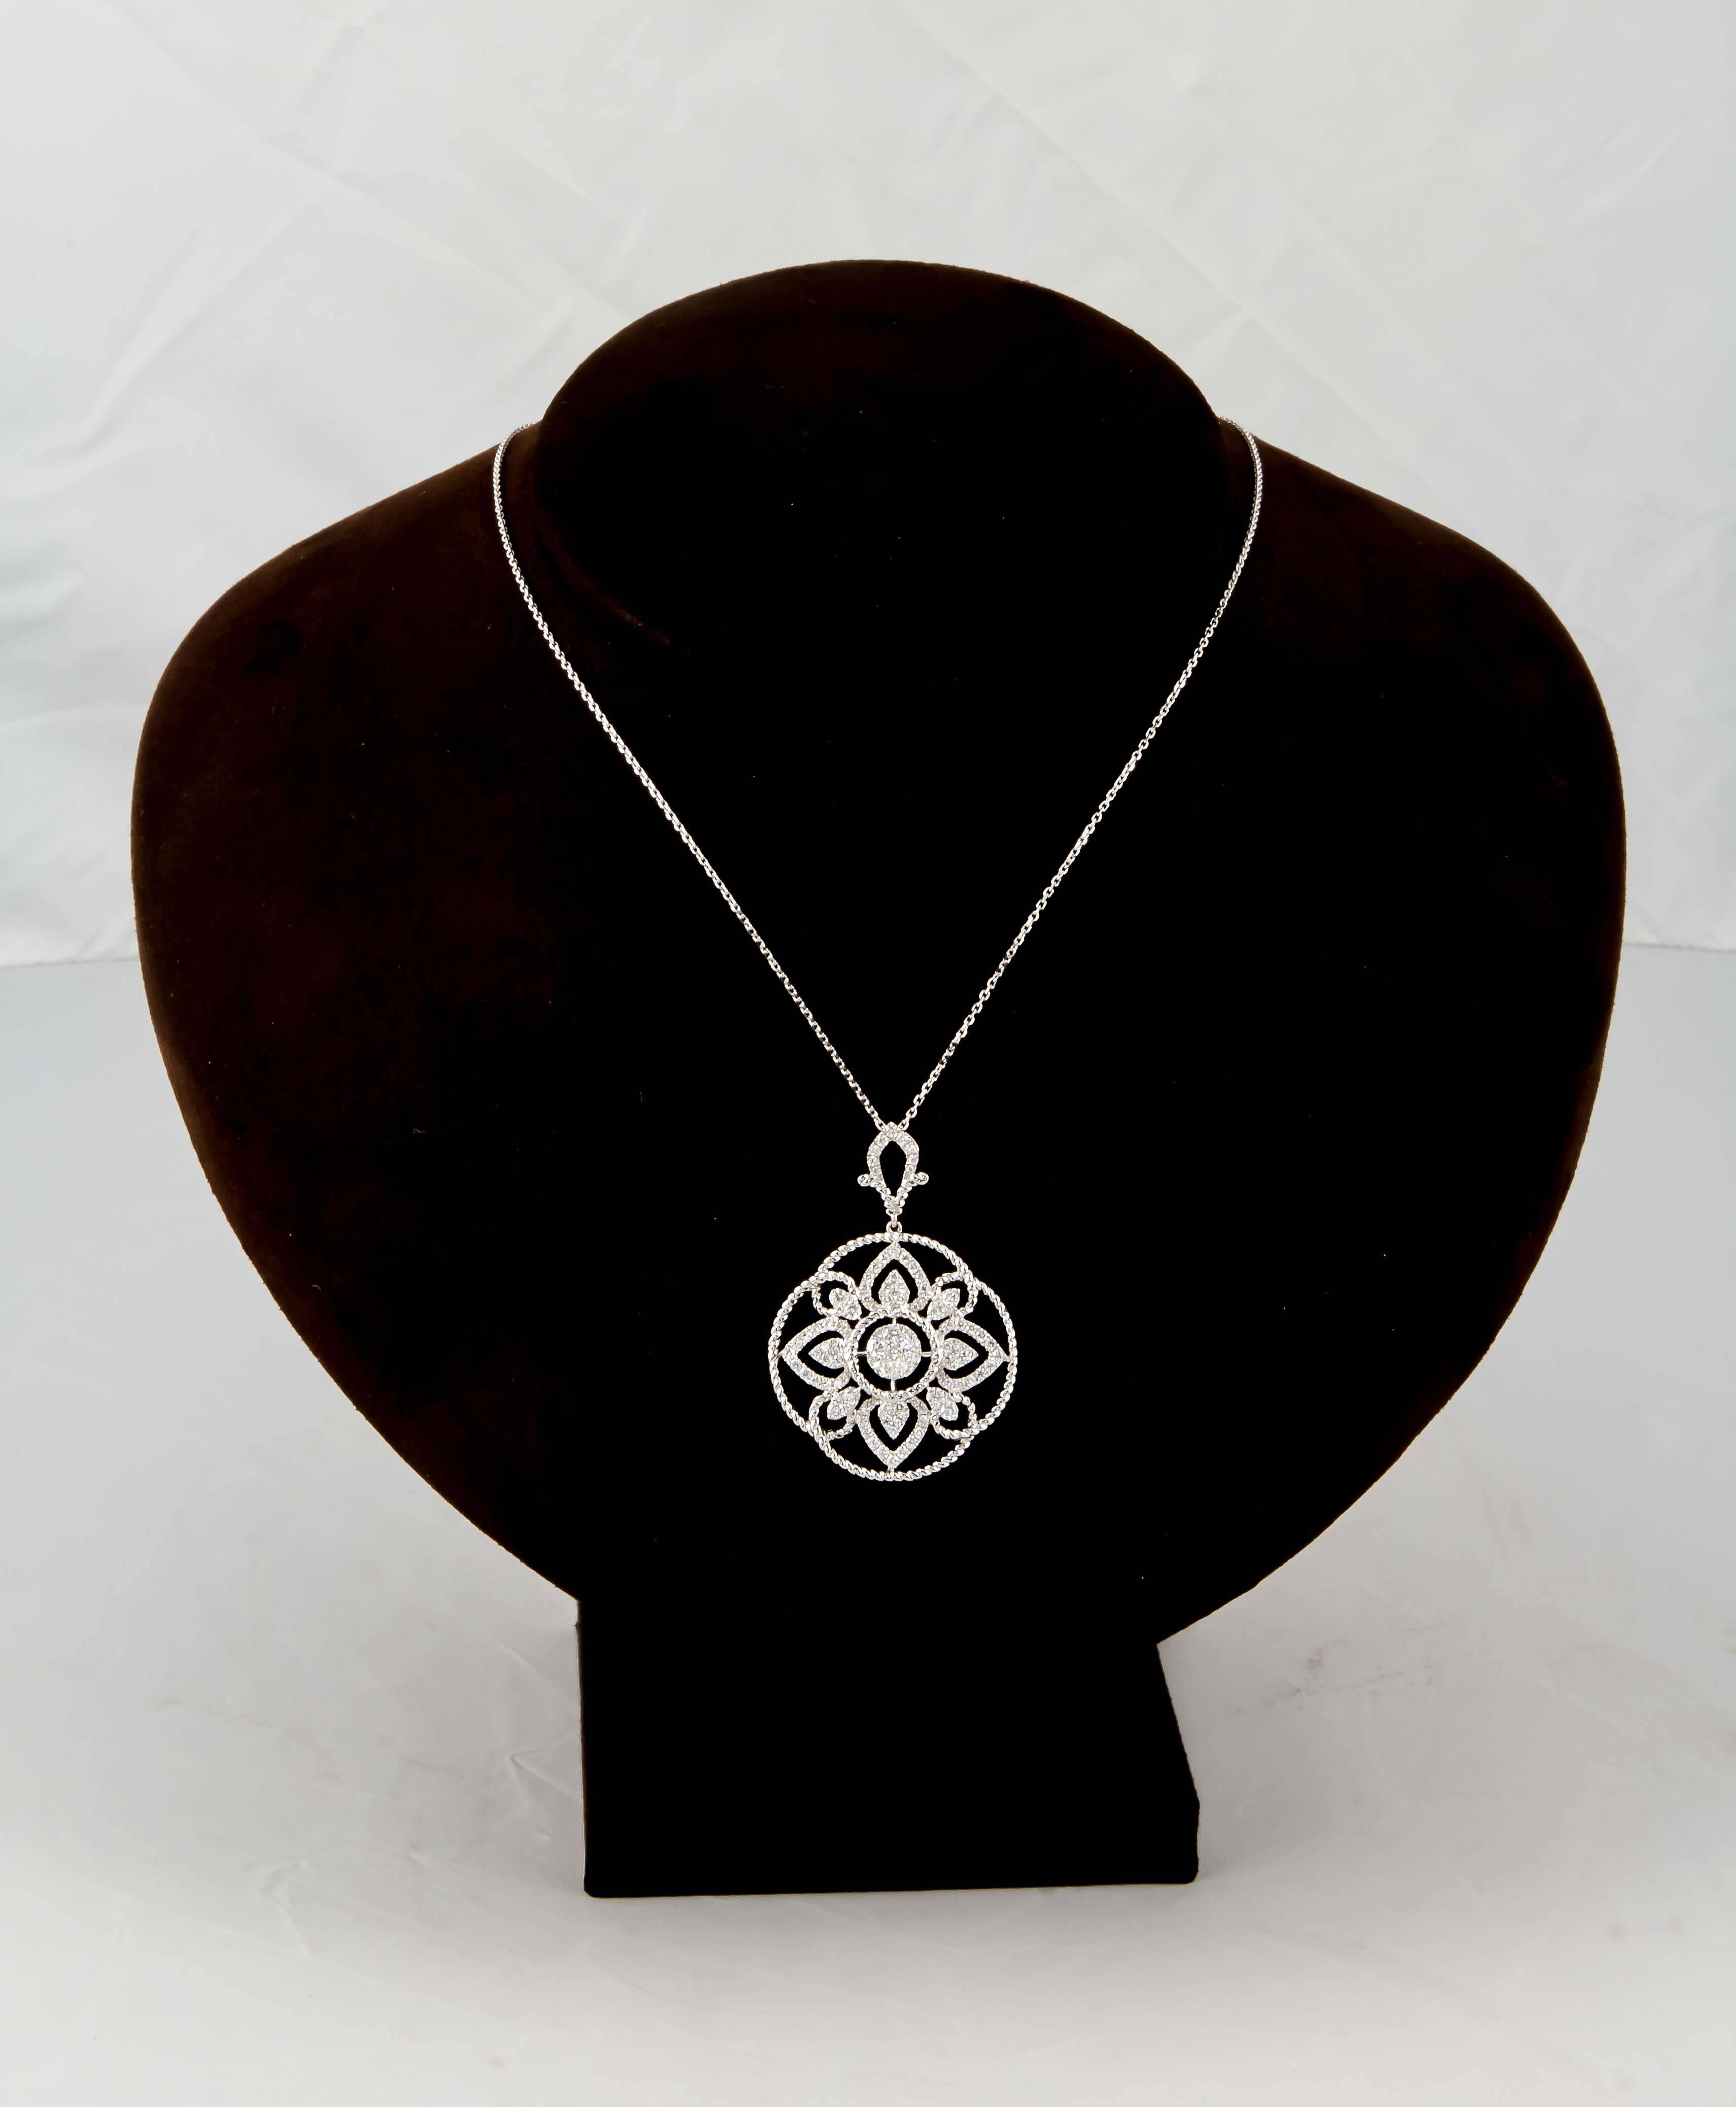 

An amazing gift!!

1.45 carats of F color VS clarity diamonds set in 18k white gold. 

An intricate design full of sparkle, the pendant also features braided gold detail. 

The pendant comes with a 16 inch white gold chain.

The circular portion